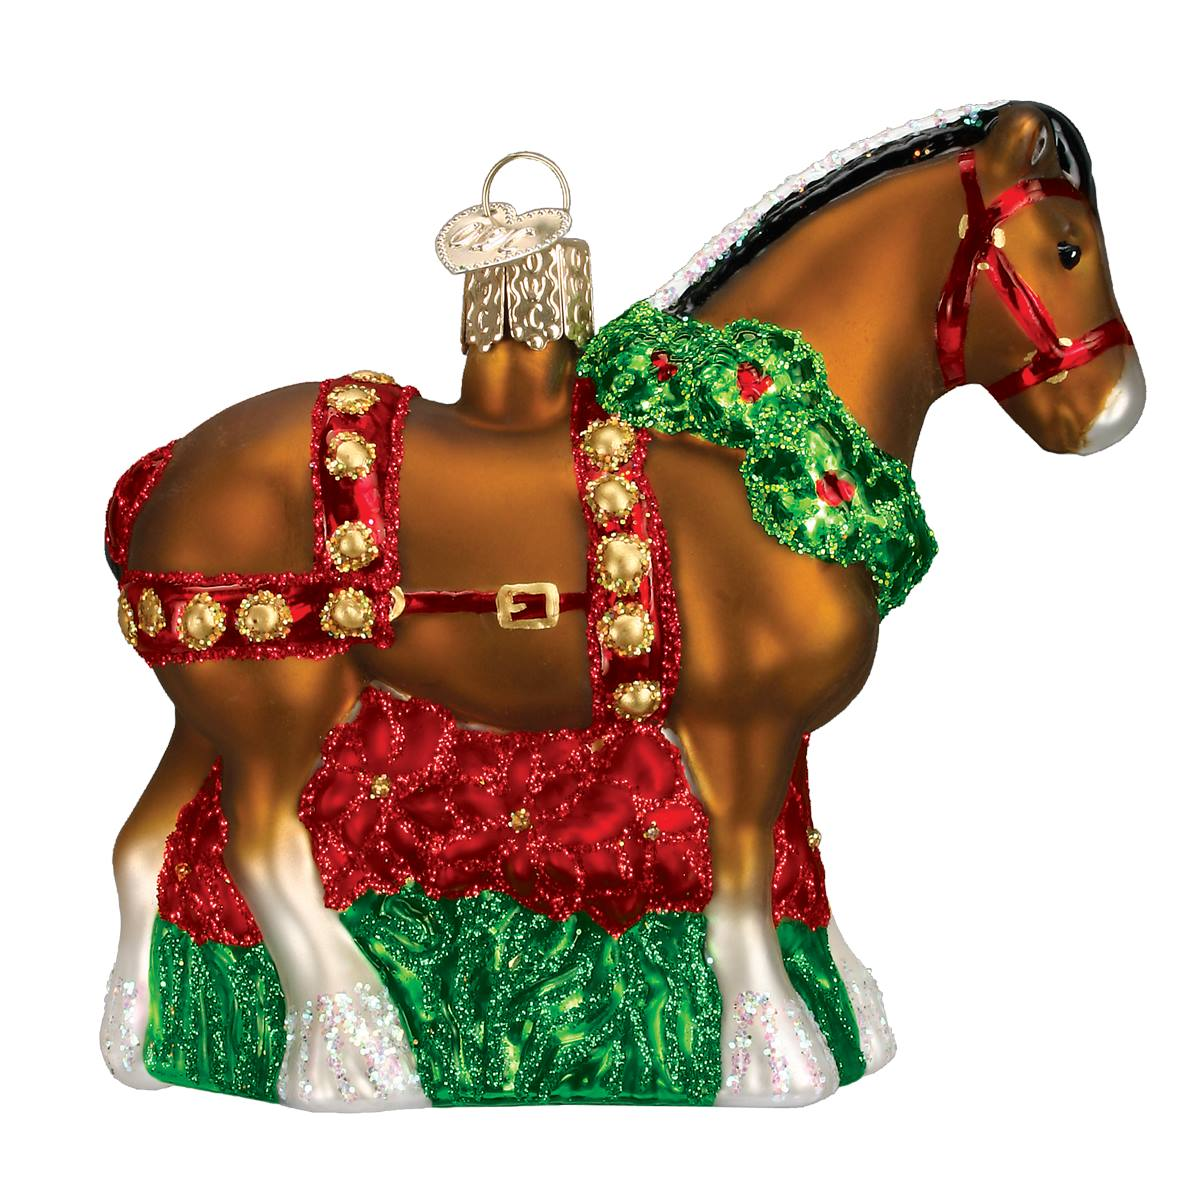 Holiday Clydesdale Ornament